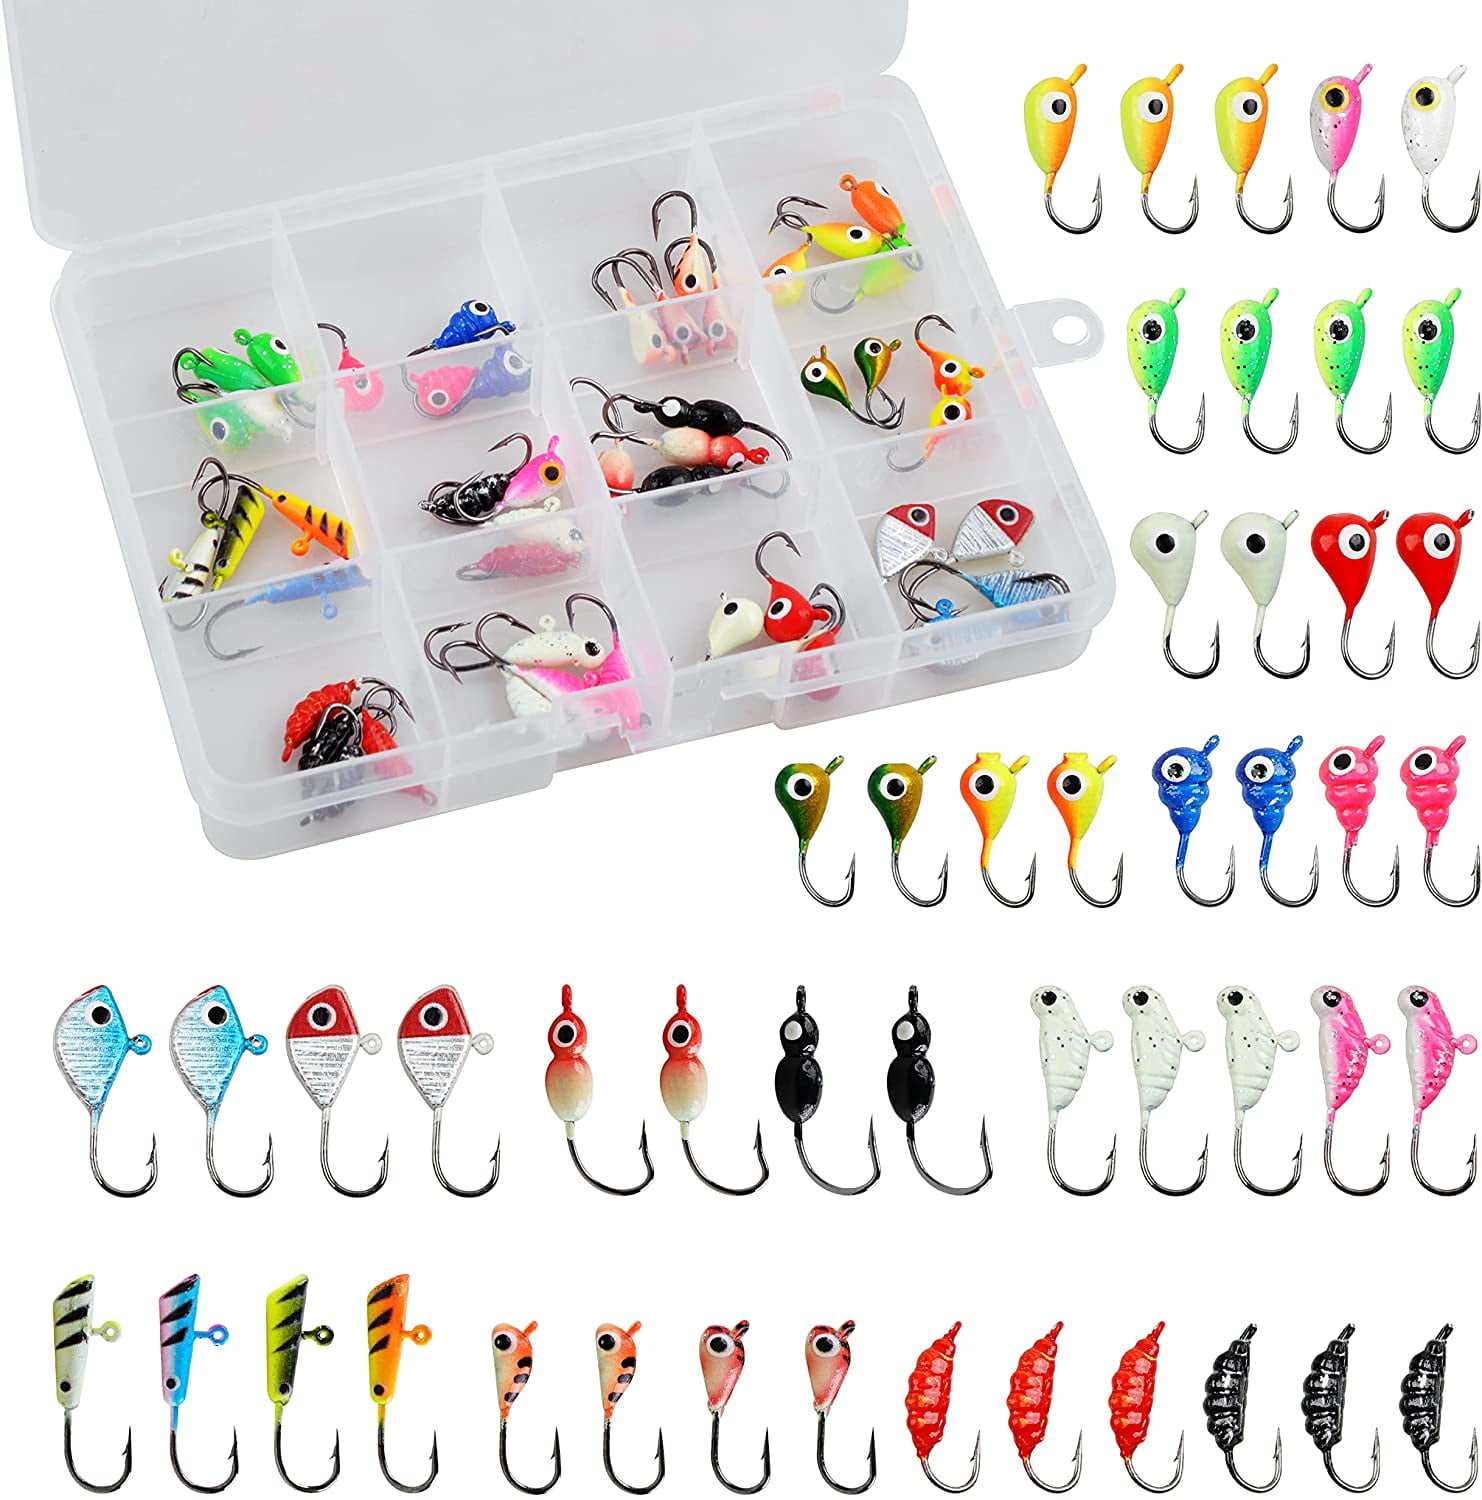  Ice Fishing Jigs Kit Ice Fishing Lures For Walleye Perch Jigs  Heads For Ice Fishing Gear Tackle Panfish Crappie Jigs 31Pcs